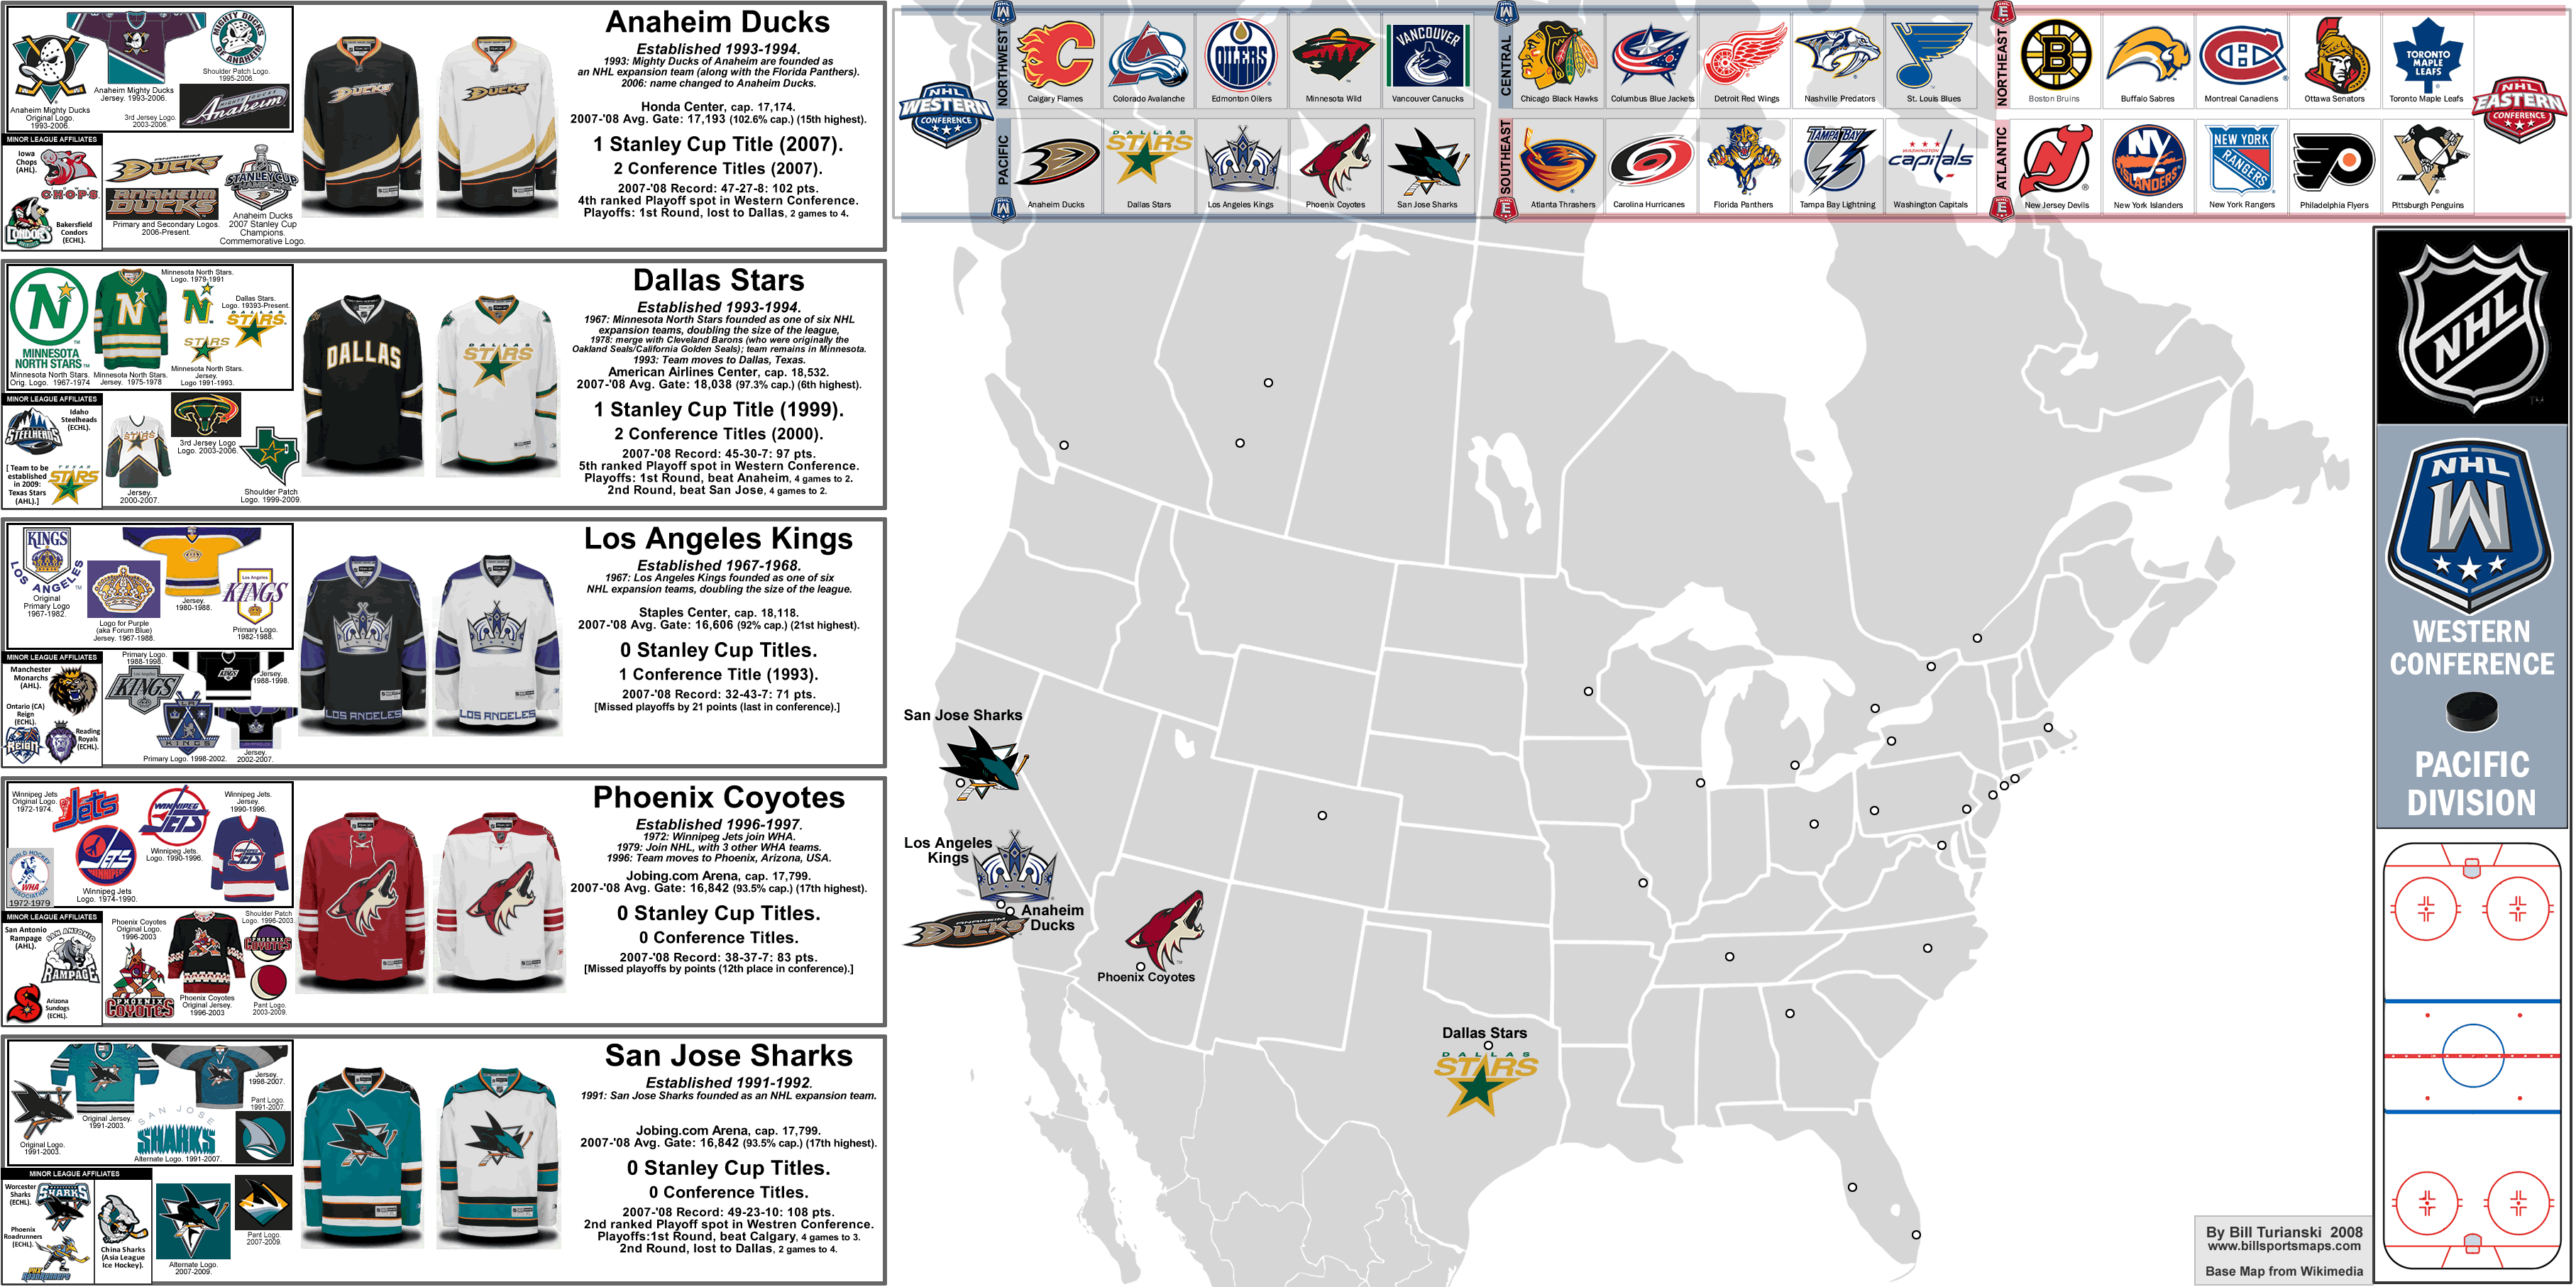 Western Conference NHL Team Logo - NHL Western Conference, Pacific Division: Map and Team Profiles